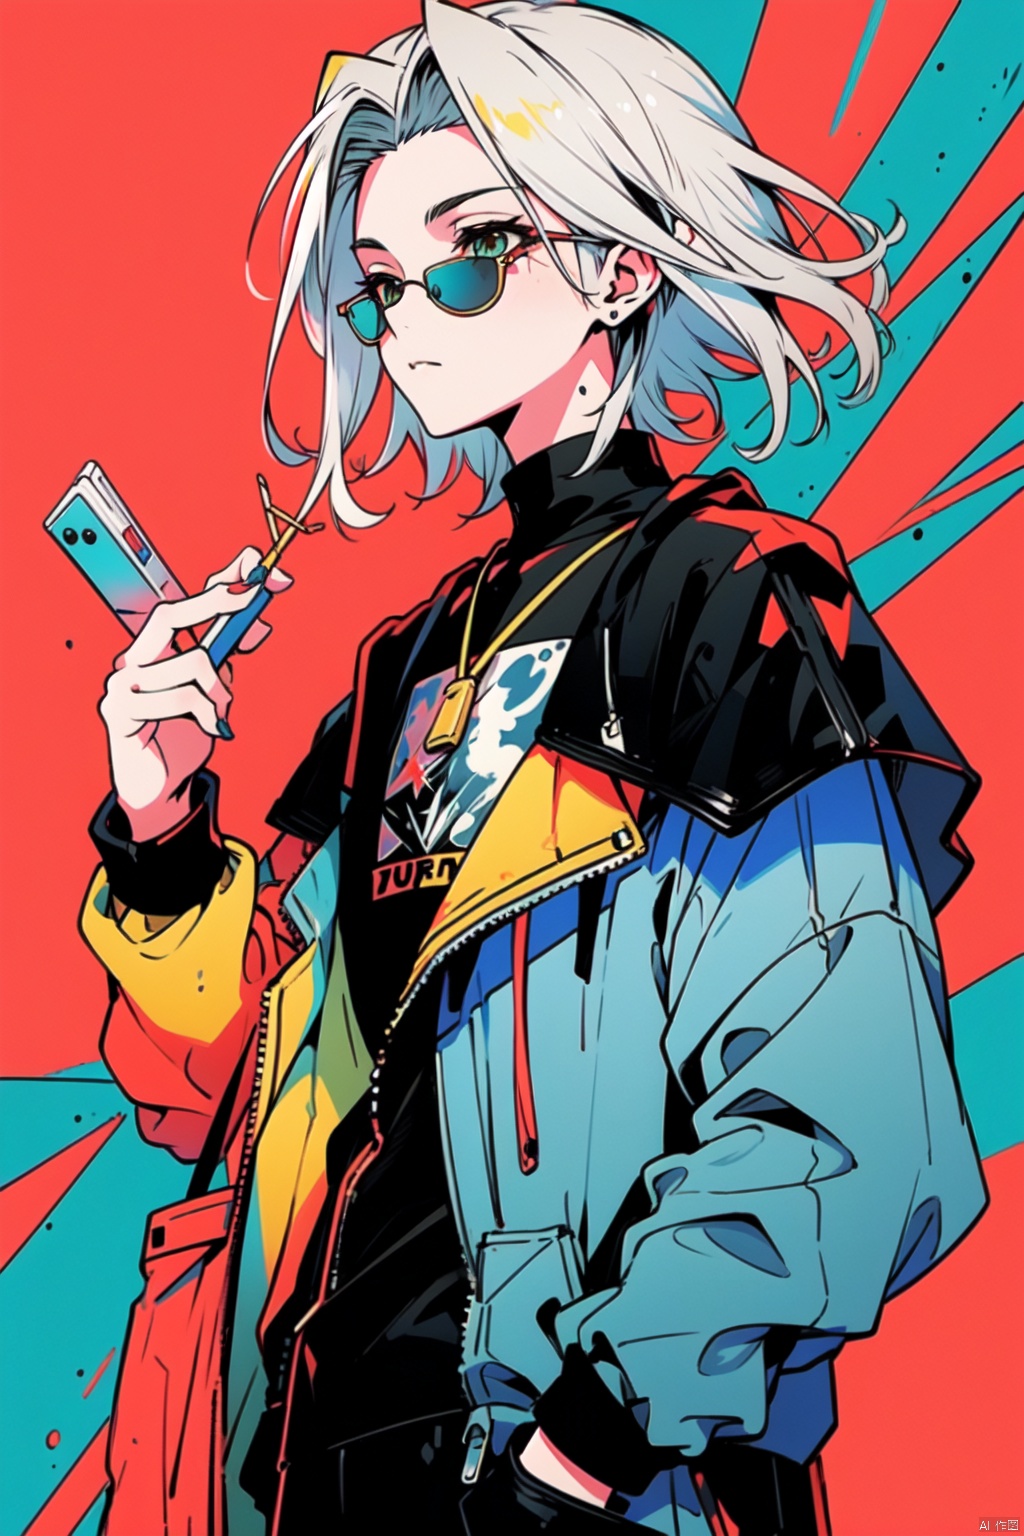  //
( code background), (data background,:1.2),
//
multicolored_background,red and white background,sam yang, (1boy:1.3), (short white hair,hair slicked back,:1.2)black sunglasses, expressionless,cowboy shot, no_eyes,(colored inner hair, colored_tips,:1.2), shota, ink style, Light-electric style, (\shuang hua\), 372089, flat, cozy animation scenes, bpstyle, green eyes,kaldef